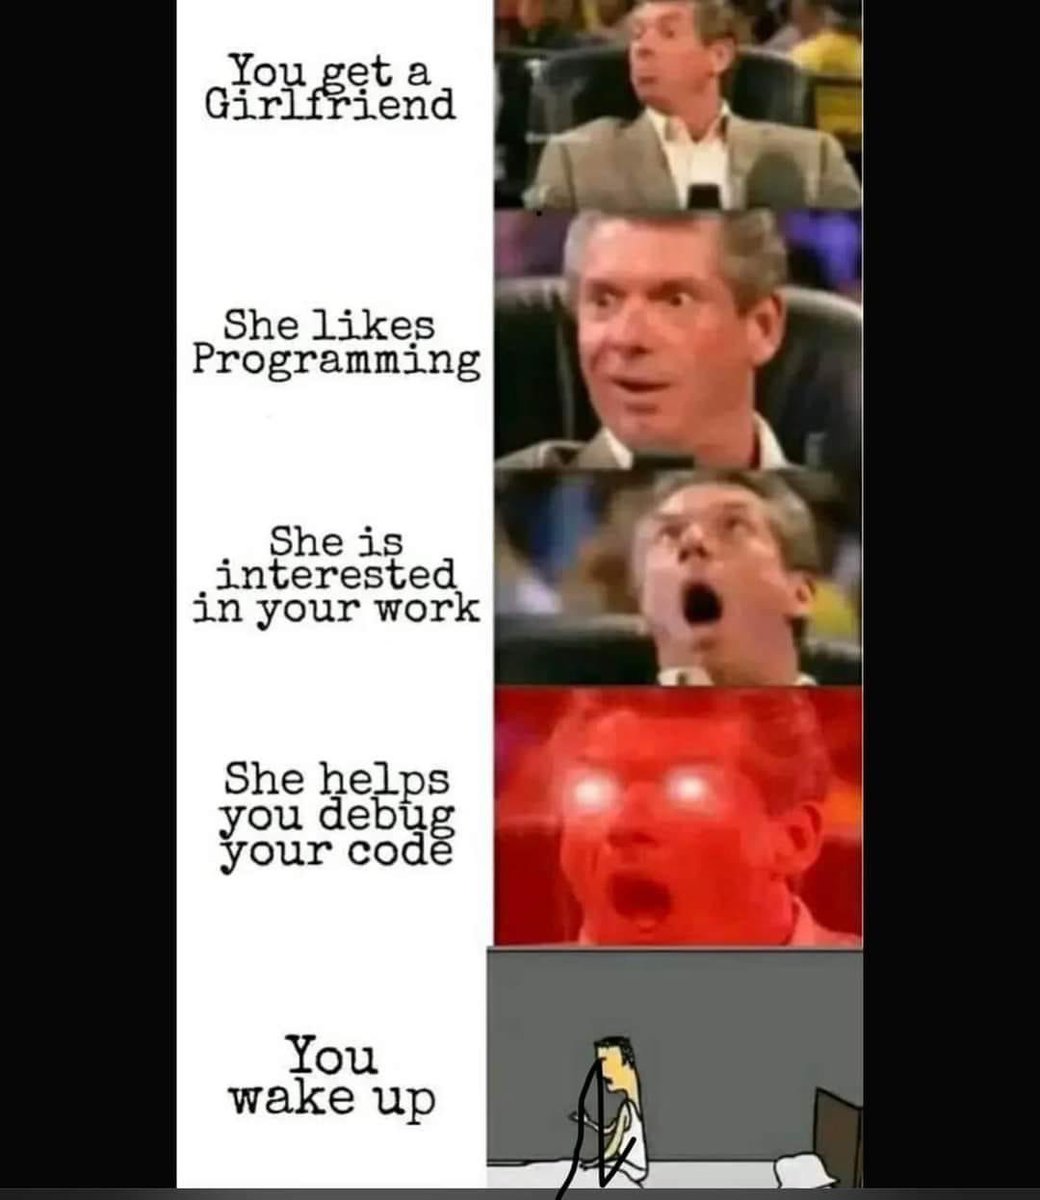 As a programmer - would you date a programmer?